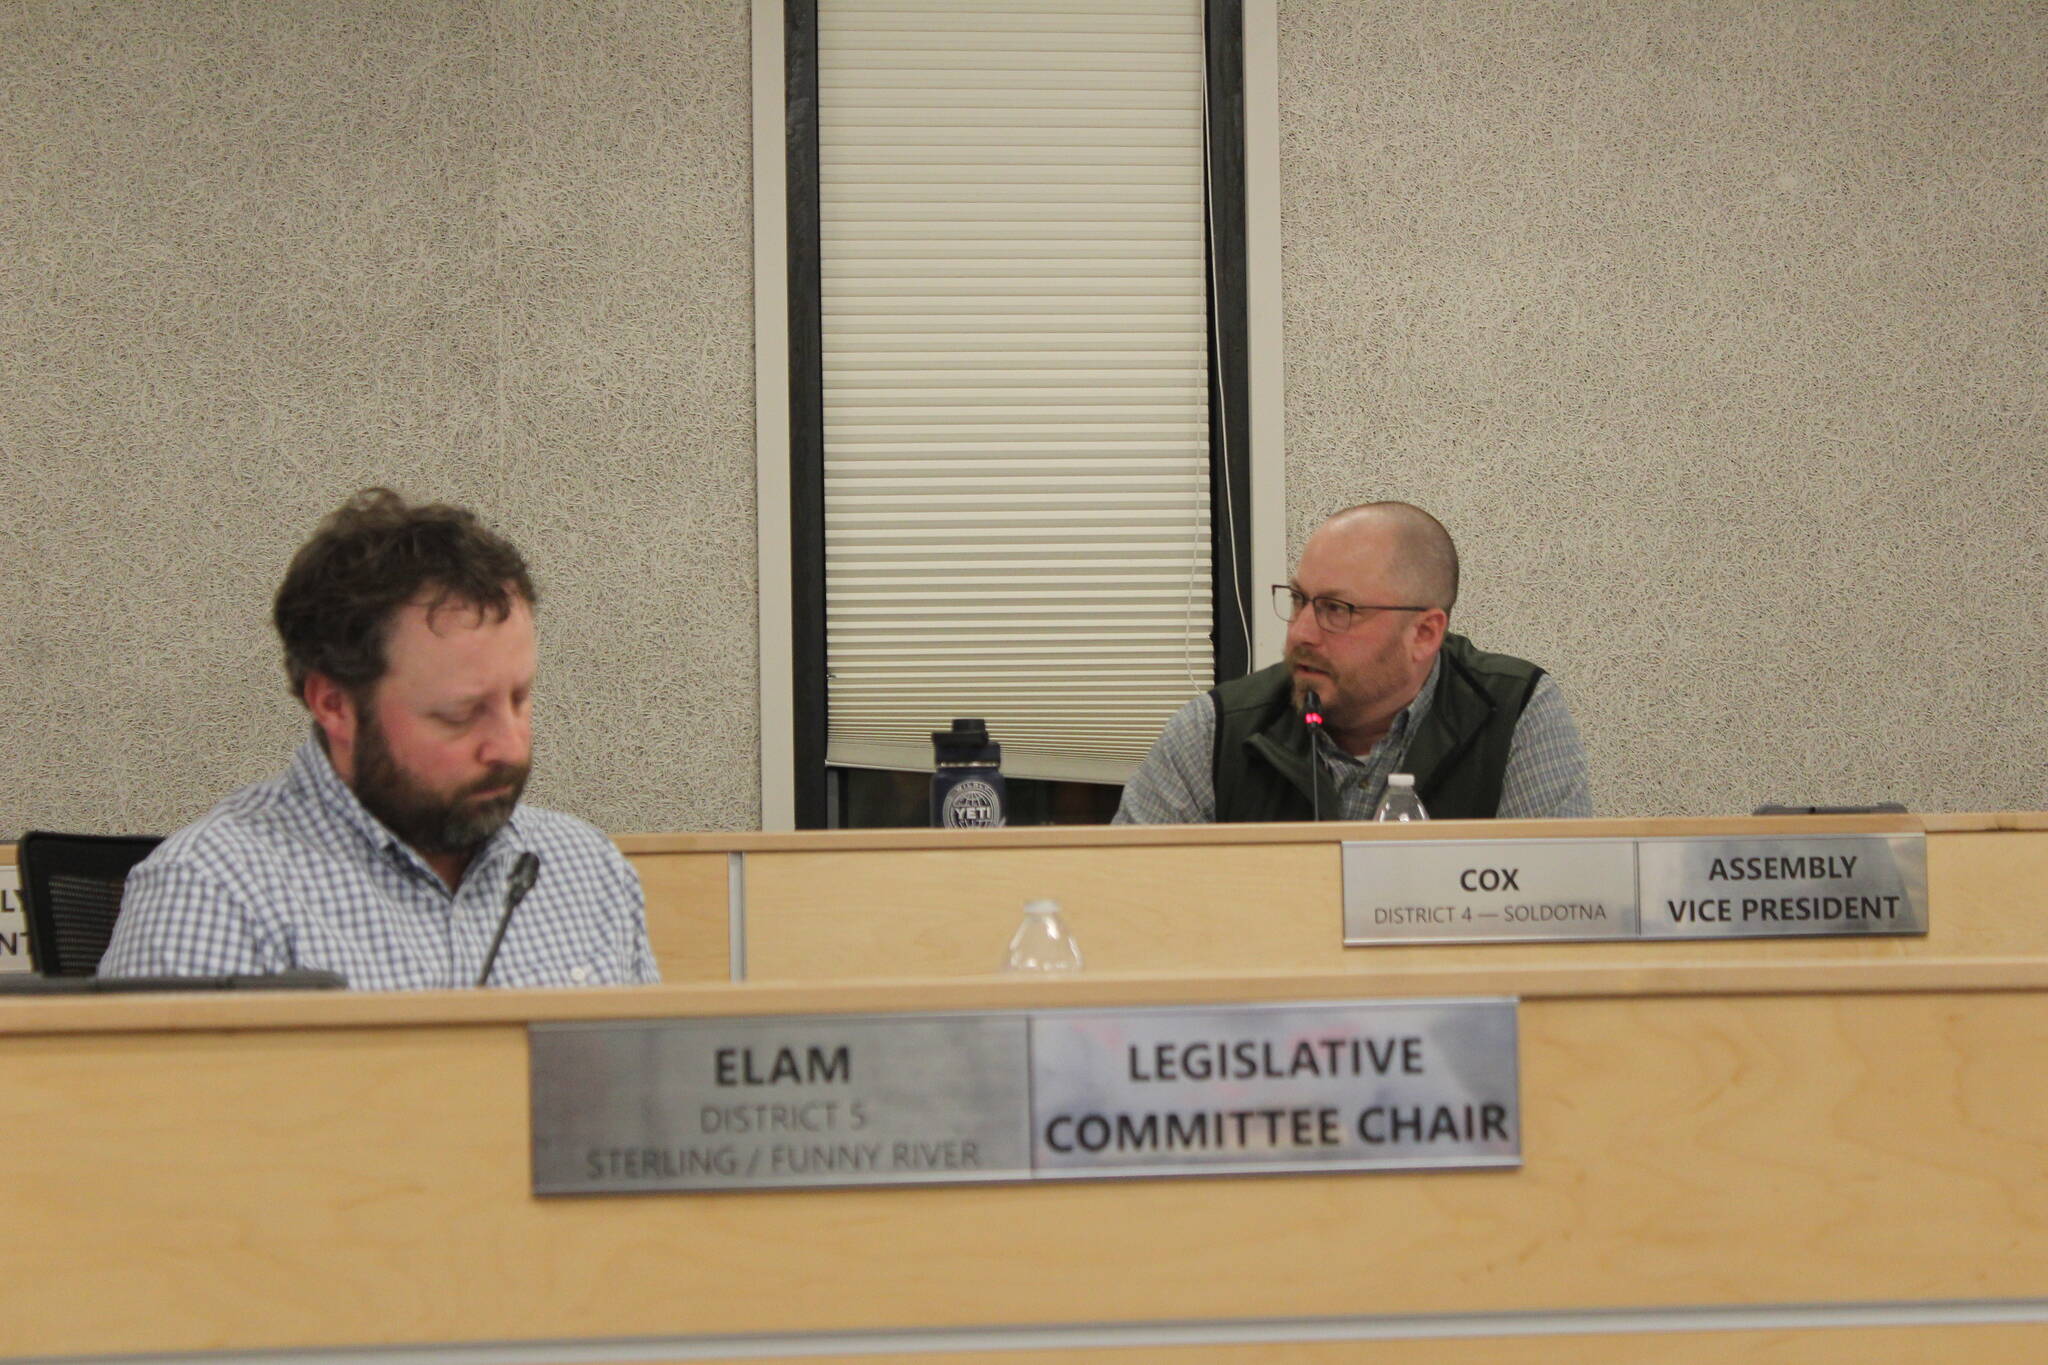 Assembly members Bill Elam, left, and Tyson Cox, right, discuss during a Kenai Peninsula Borough Assembly meeting a resolution only permitting certain chaplains to deliver invocations before borough assembly meetings on Tuesday, Nov. 7, 2023 in Soldotna, Alaska. (Ashlyn O’Hara/Peninsula Clarion)